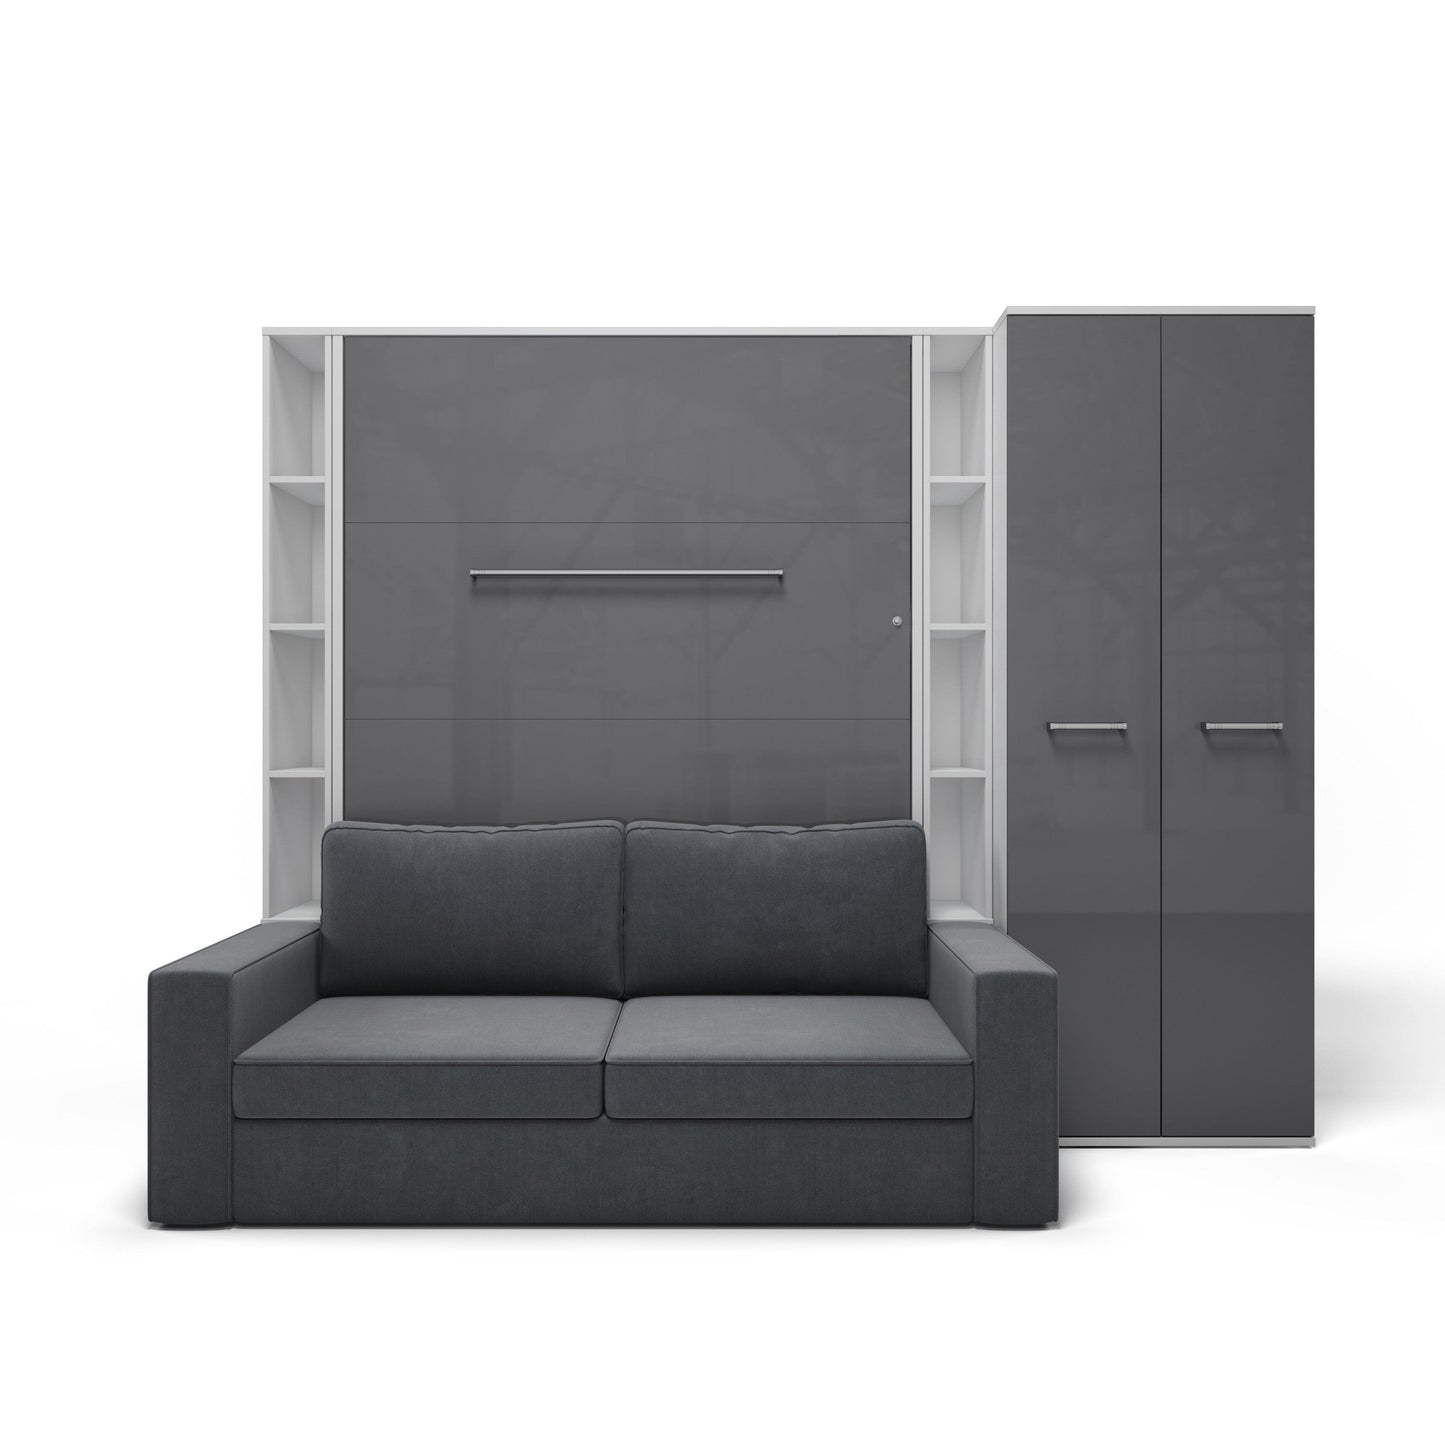 Maxima House Vertical FULL size Murphy Bed Invento with a Sofa, two Cabinets and Wardrobe White/Grey + Grey IN001/23/24WG-G